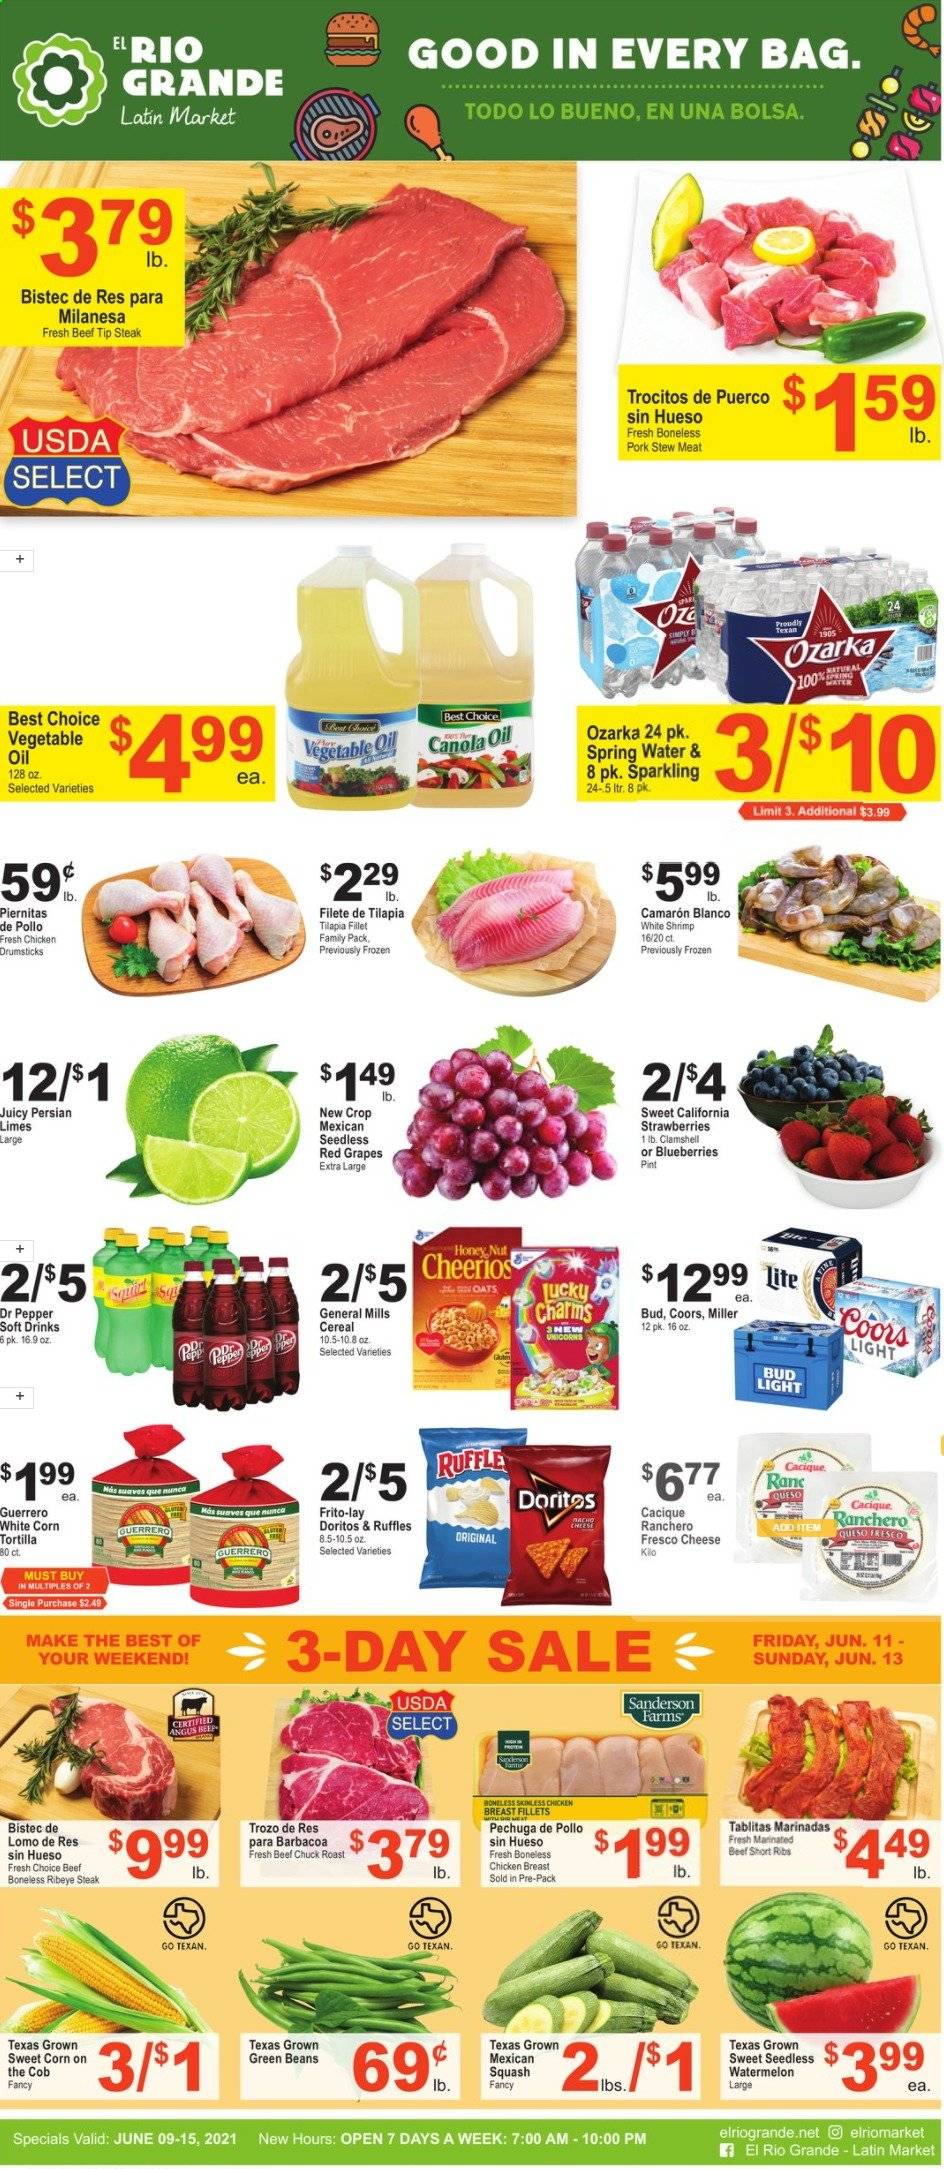 thumbnail - El Rio Grande Flyer - 06/09/2021 - 06/15/2021 - Sales products - Coors, stew meat, tortillas, beans, green beans, sweet corn, mexican squash, blueberries, grapes, limes, strawberries, watermelon, tilapia, shrimps, queso fresco, cheese, Doritos, Frito-Lay, Ruffles, oats, cereals, Cheerios, canola oil, vegetable oil, oil, Dr. Pepper, soft drink, spring water, beer, Bud Light, Miller, chicken breasts, chicken drumsticks, beef meat, beef ribs, beef steak, steak, chuck roast, ribeye steak, marinated beef. Page 1.